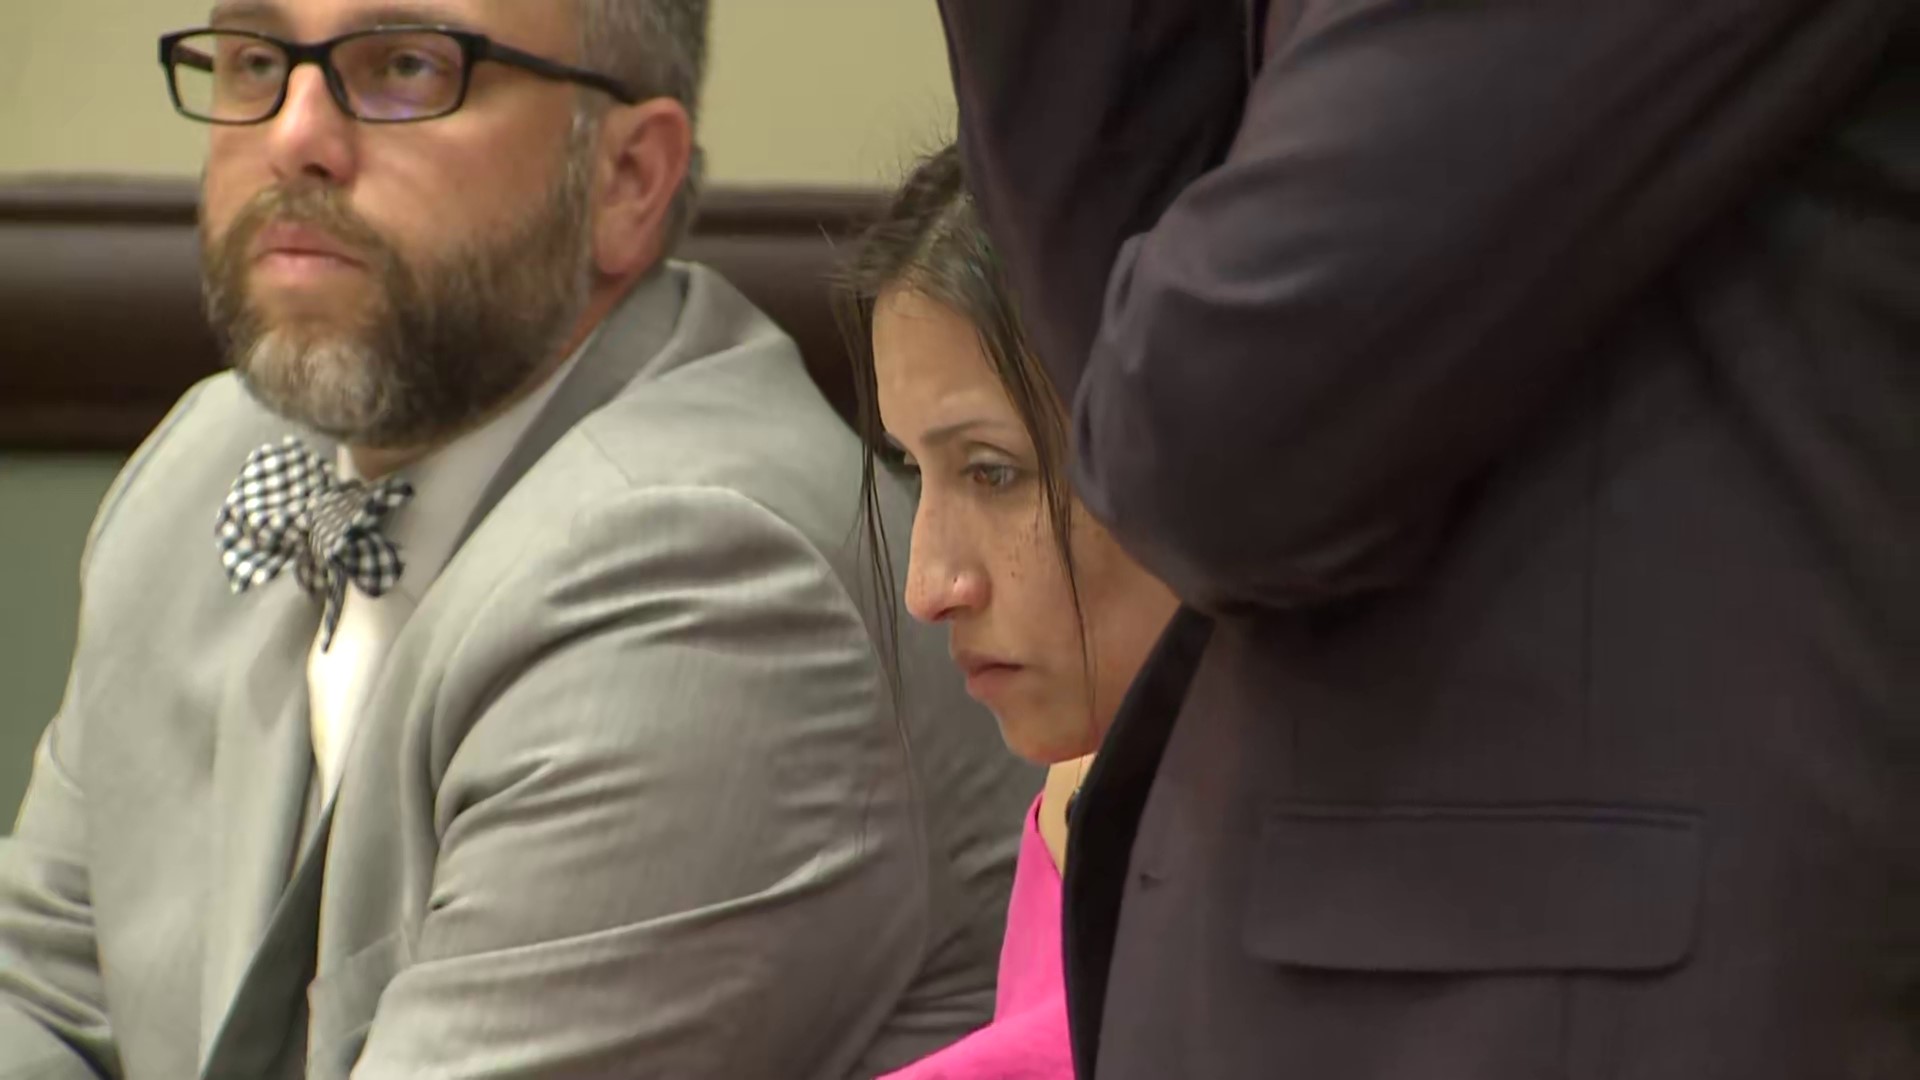 Leticia Gonzales has previously pleaded no contest to one count of operating while intoxicated causing death. She withdrew her plea in court Thursday.